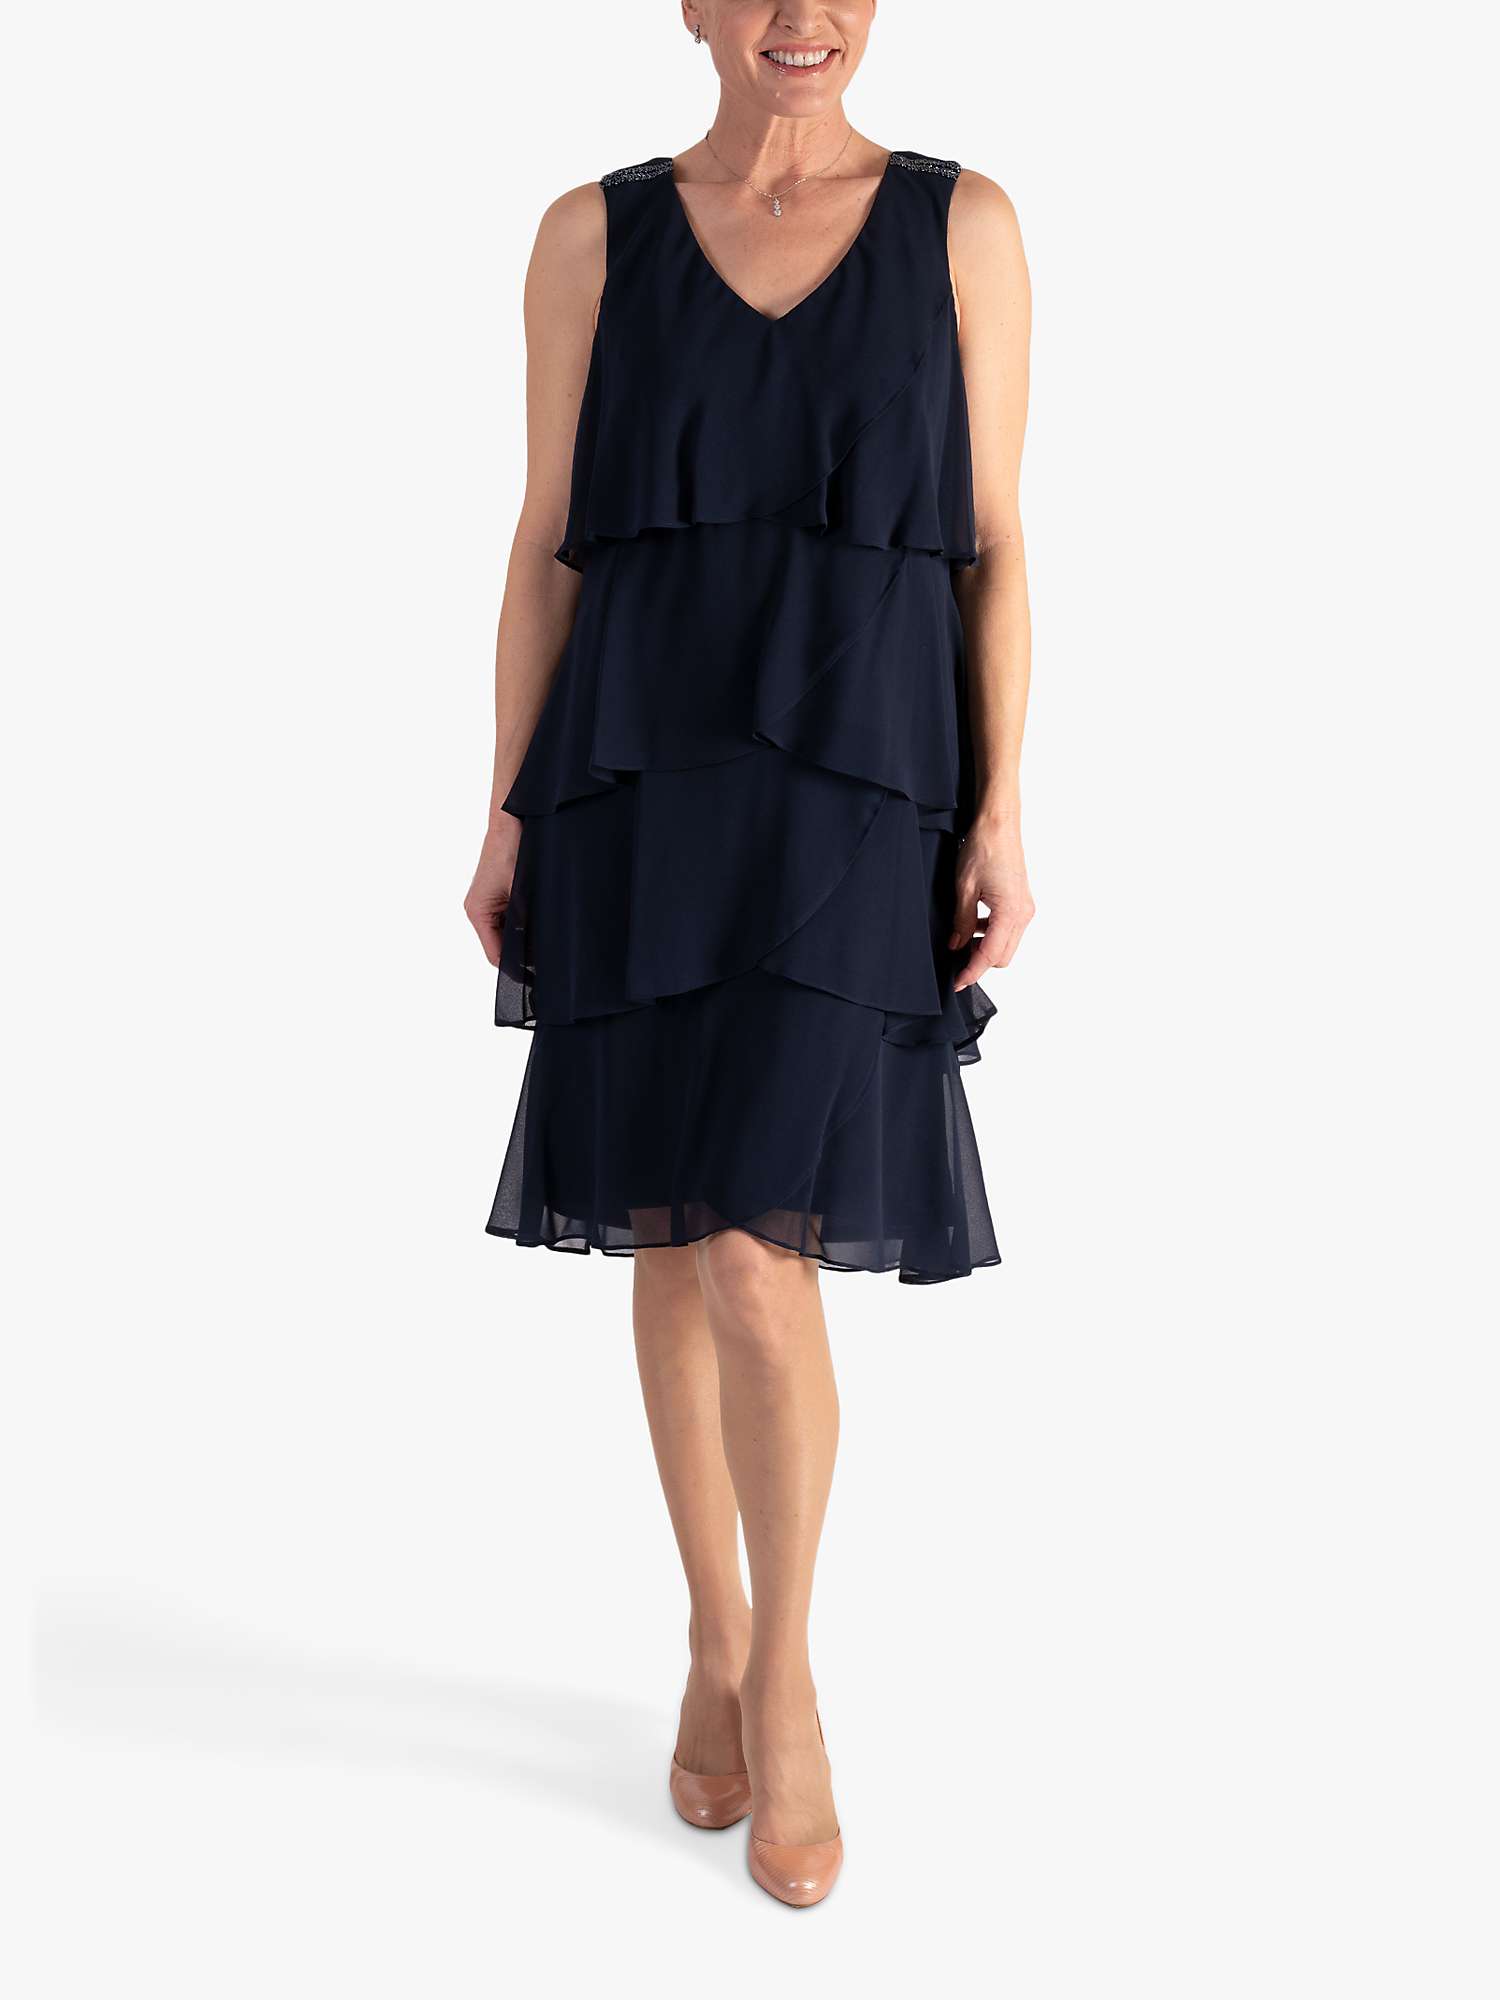 Buy chesca Tiered Chiffon Knee Length Shift Dress, Navy Online at johnlewis.com